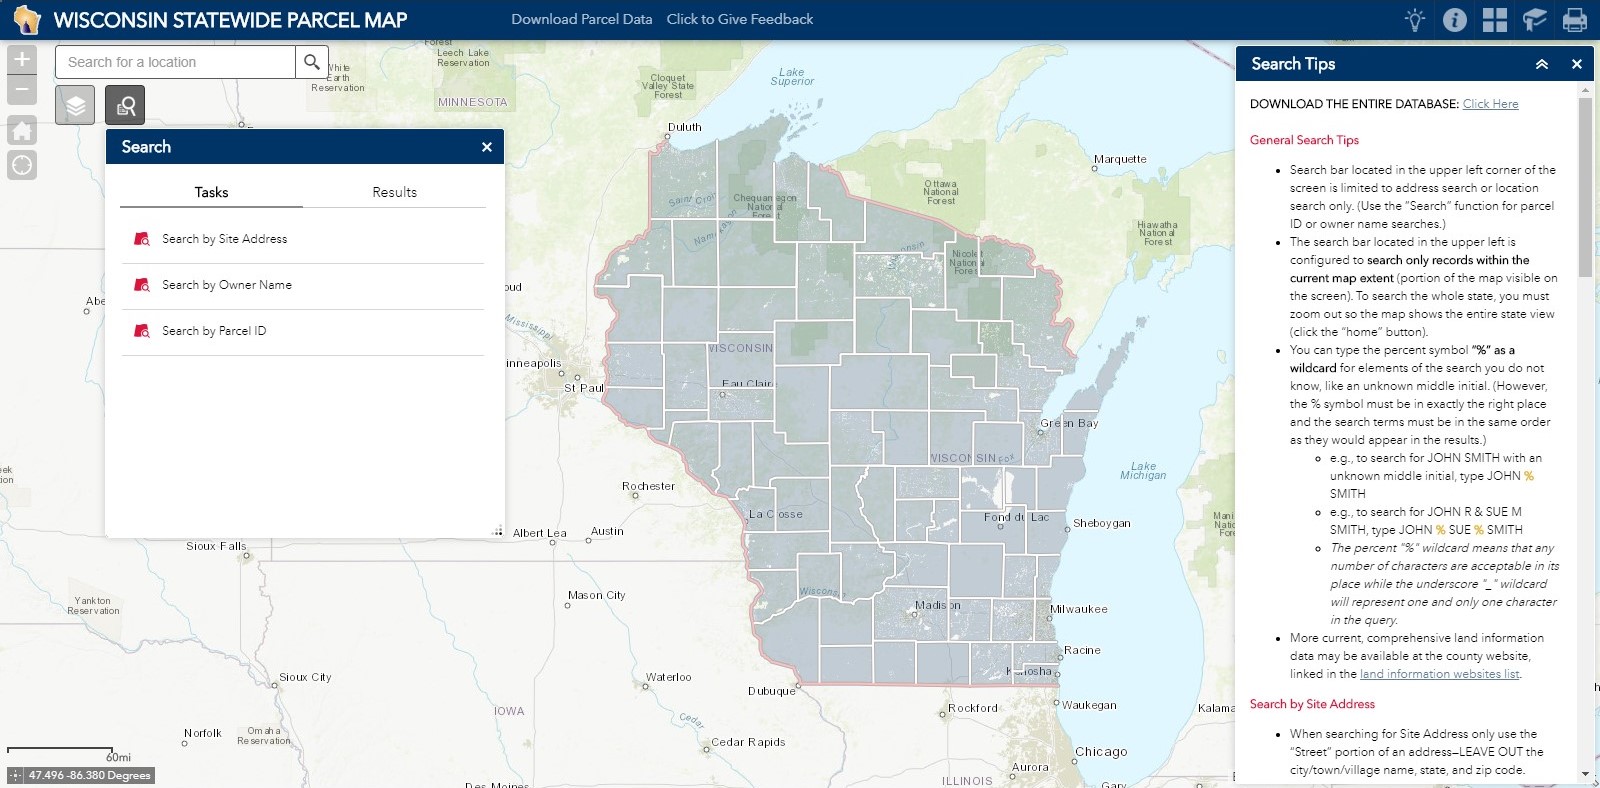 Statewide Parcel Map Web-app example image